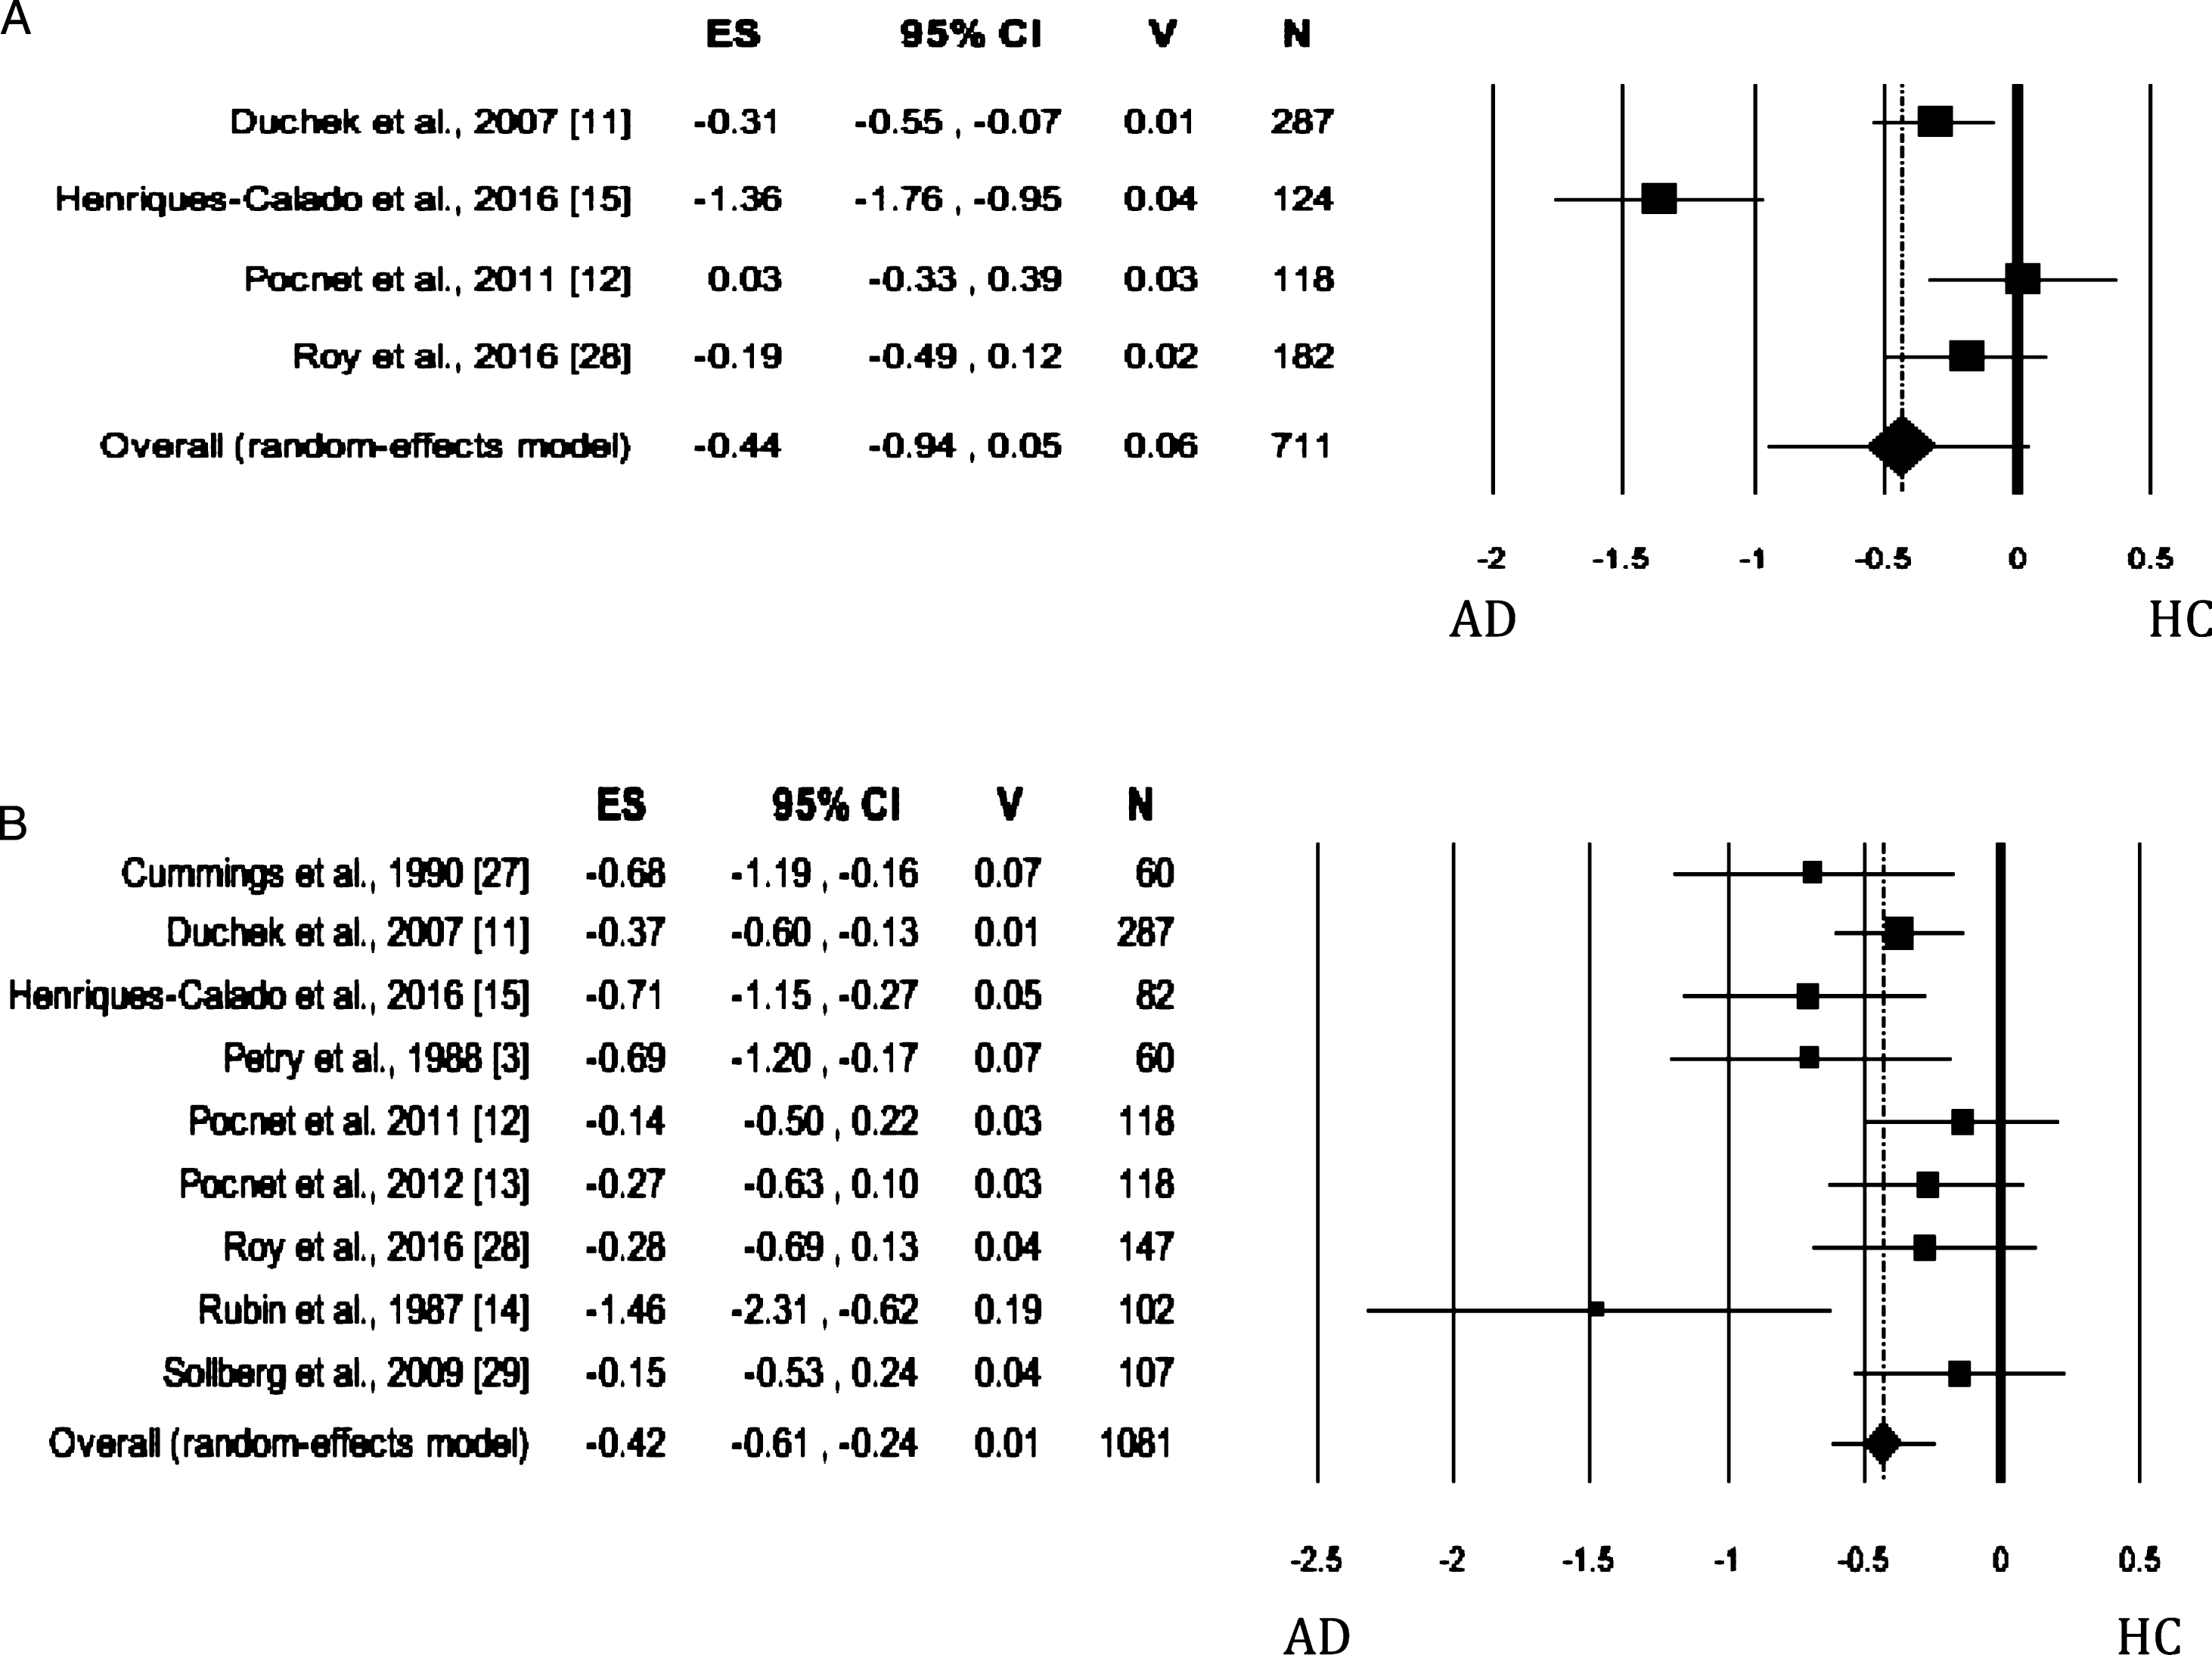 Forest plot for Agreeableness evaluated by self-rated (A) measures and informant-rated (B) measures, displaying effect size (Hedges’ g) calculated using a random effects model. ES, effect size; CI, confidence intervals; V, variance; N, total number of participants; AD, Alzheimer’s disease; HC, healthy subjects.